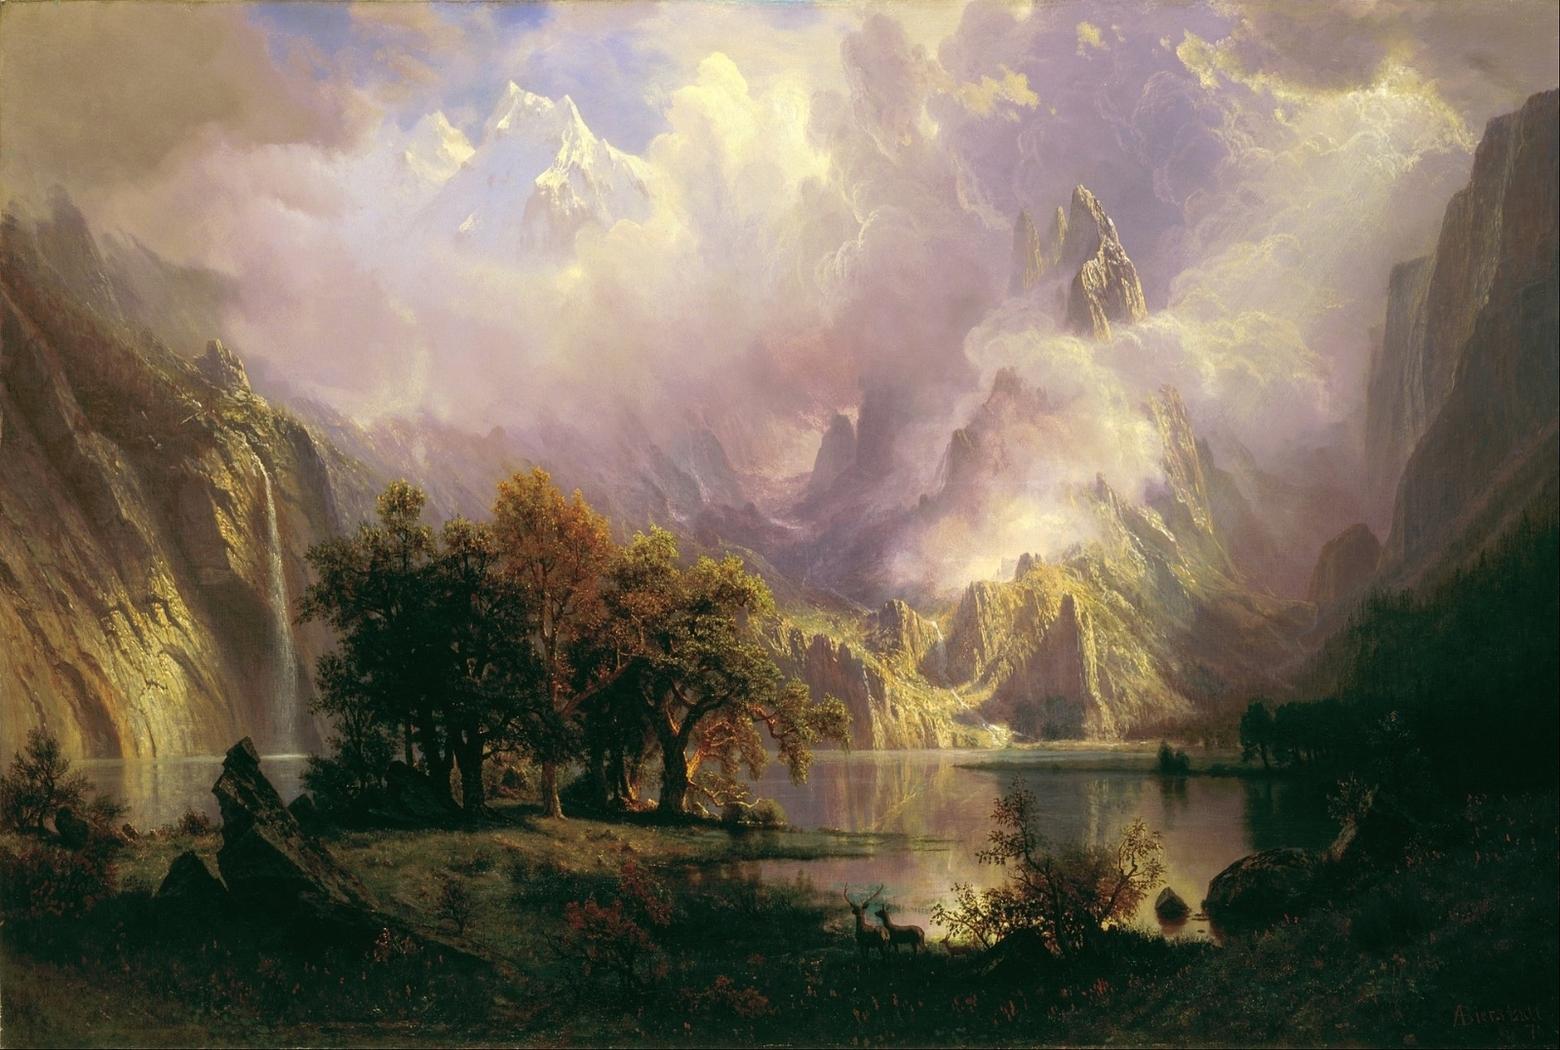 "Rocky Mountain Landscape" (1869) which hangs in The White House